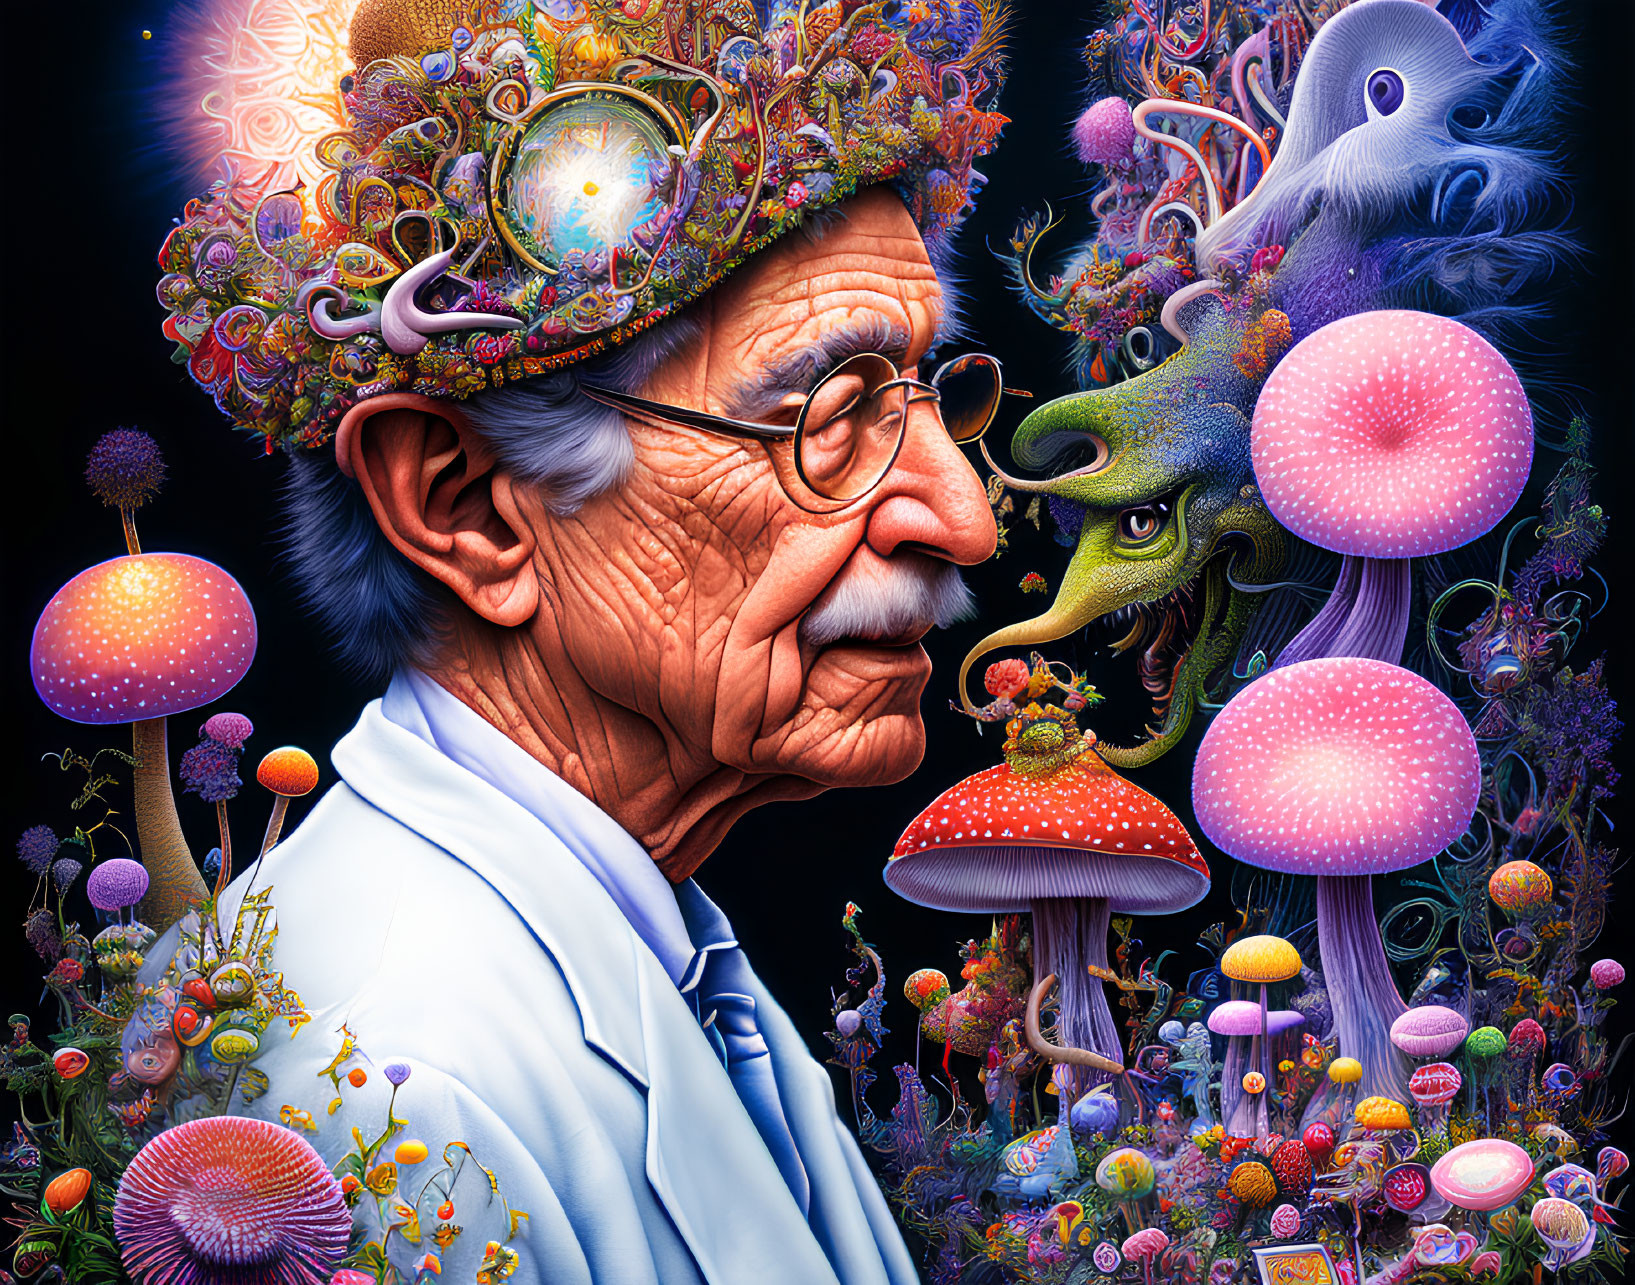 Elderly man with colorful hat among vibrant mushrooms and flora